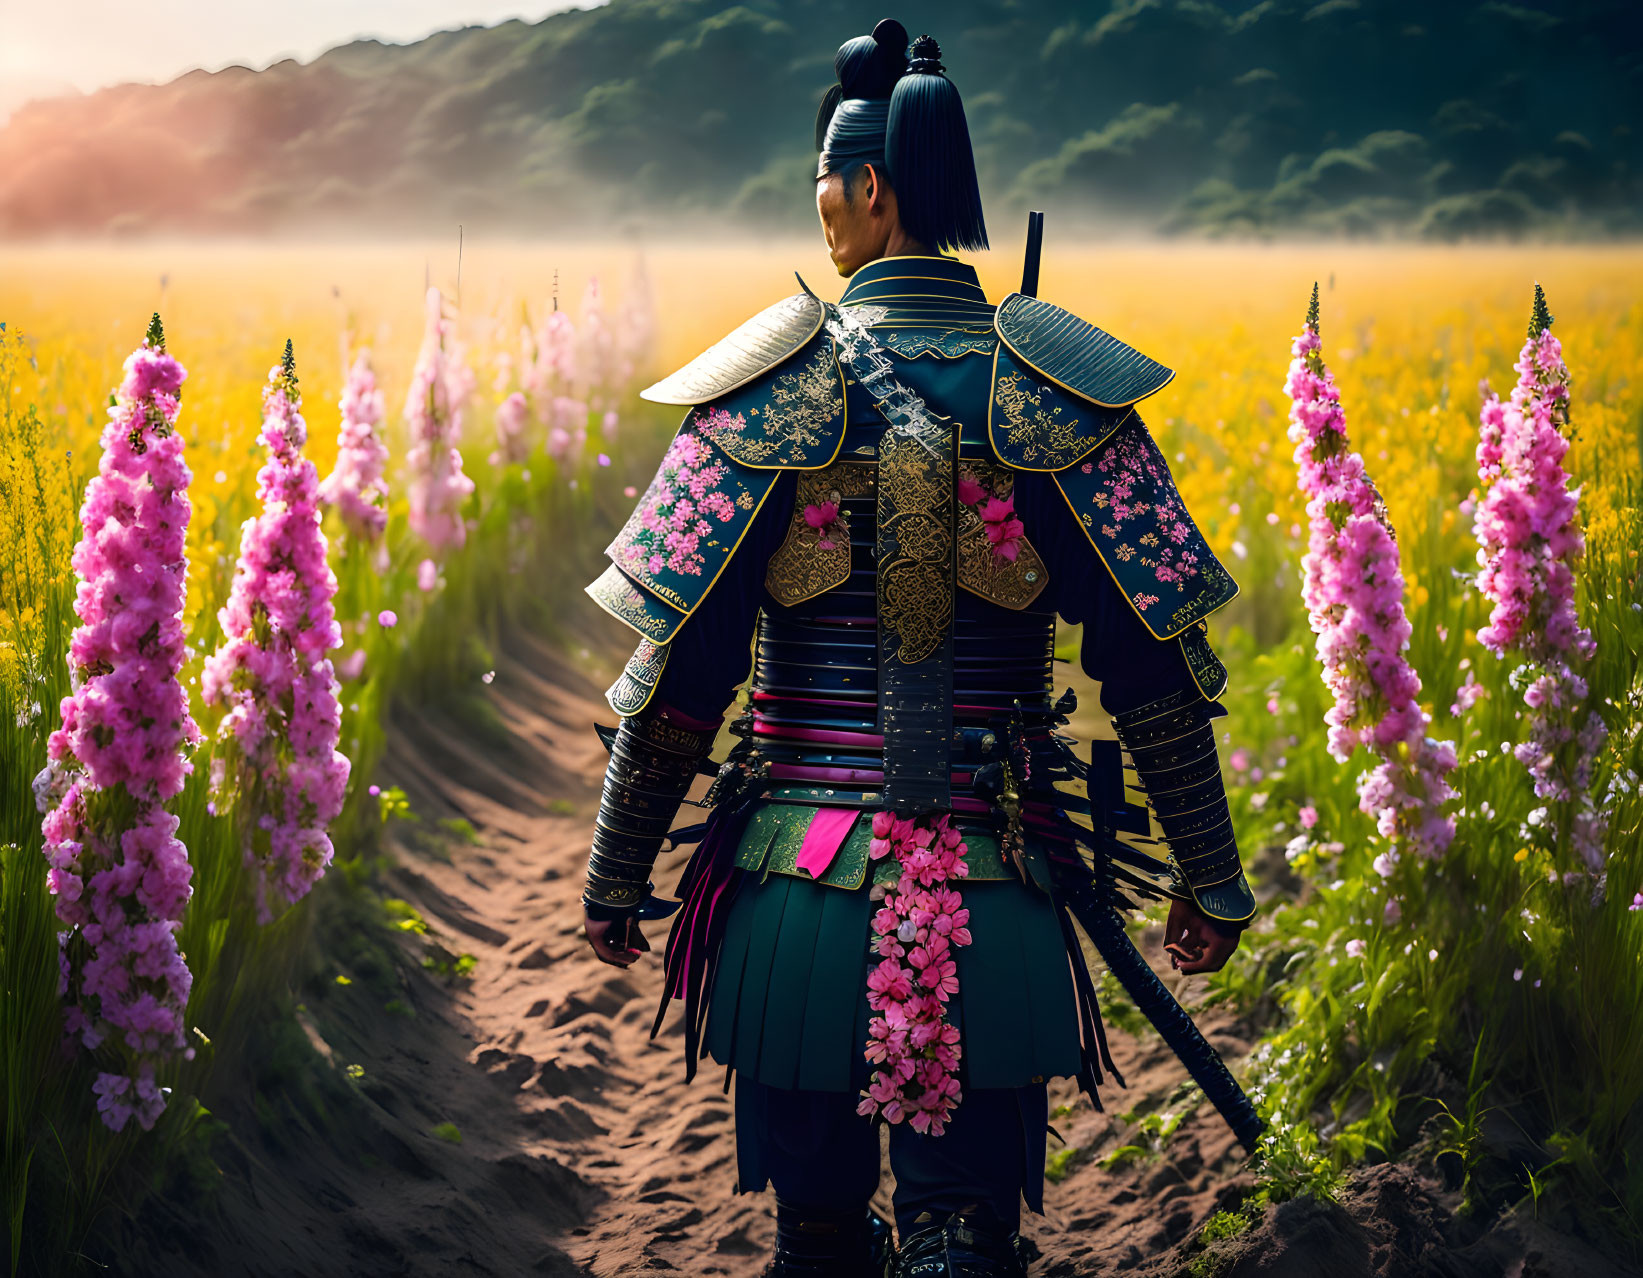 Samurai in traditional armor surrounded by colorful flowers and mist